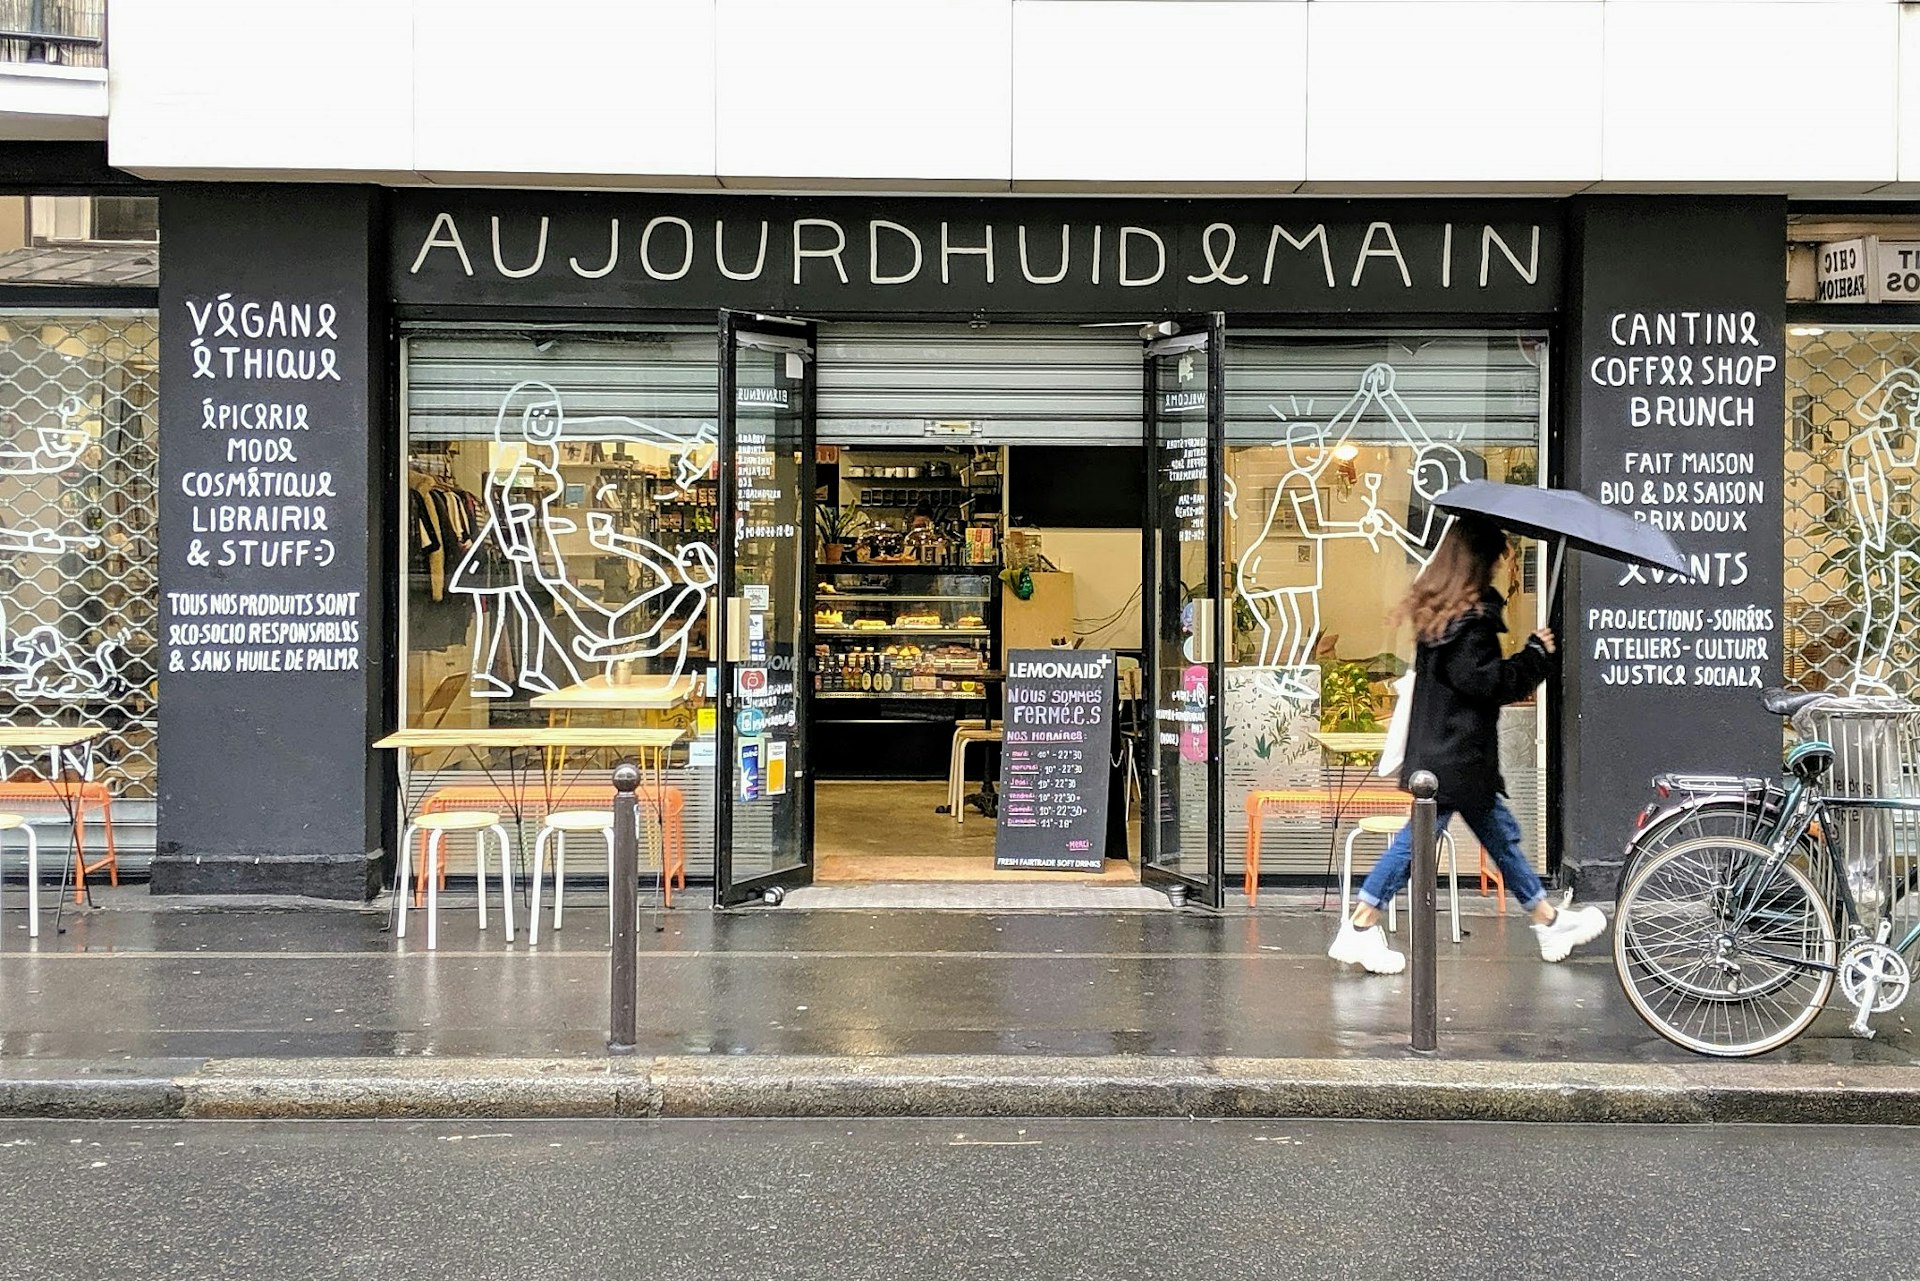 A lady with an umbrella walks past the Audjourd'hui Demain storefront; the walls are black with white signage and the large windows have white line drawings. 